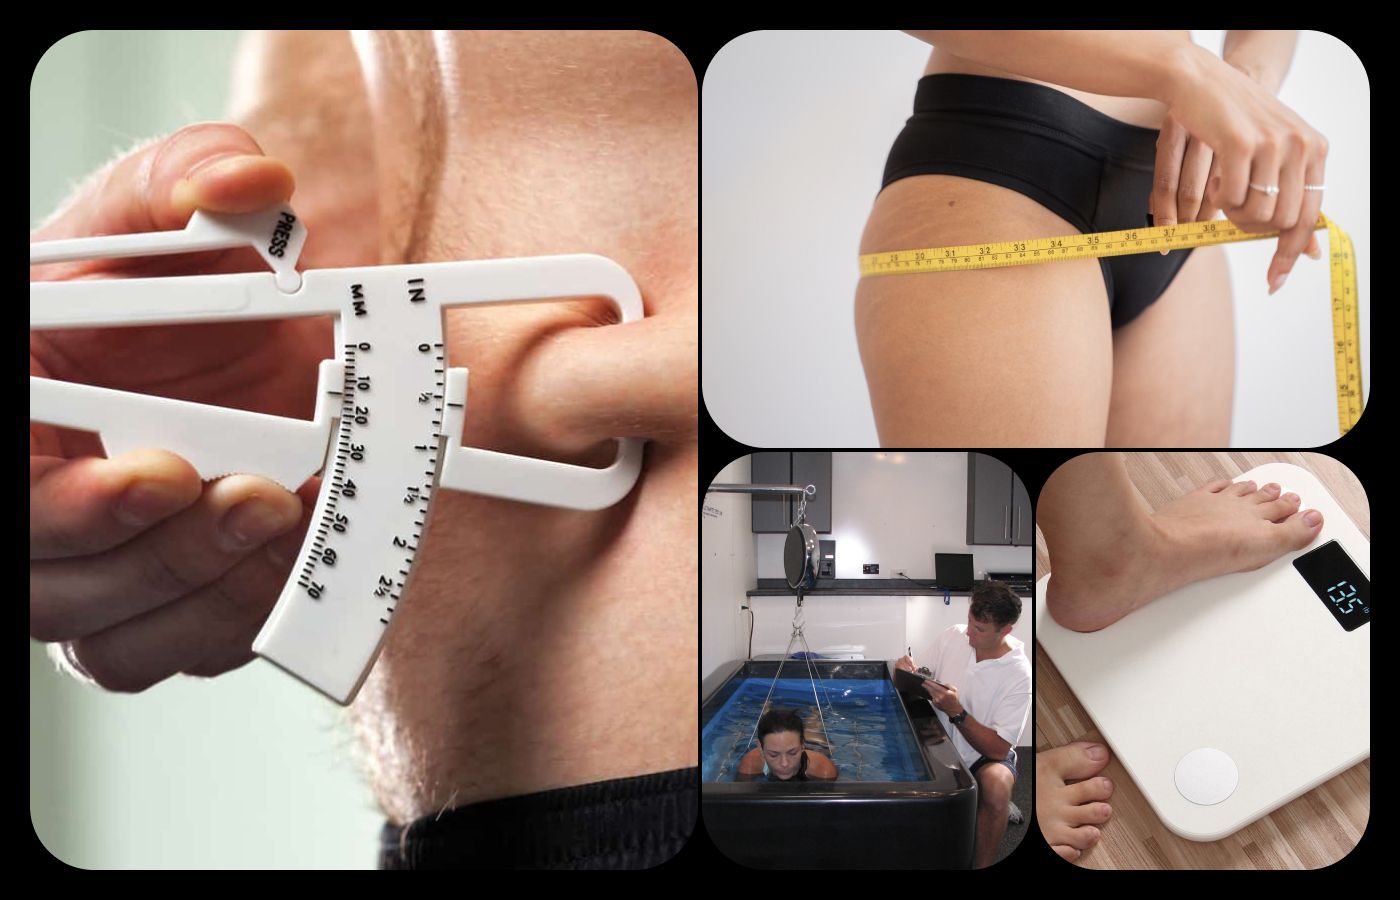 How does a scale calculate your body fat, muscle mass, BMI, etc